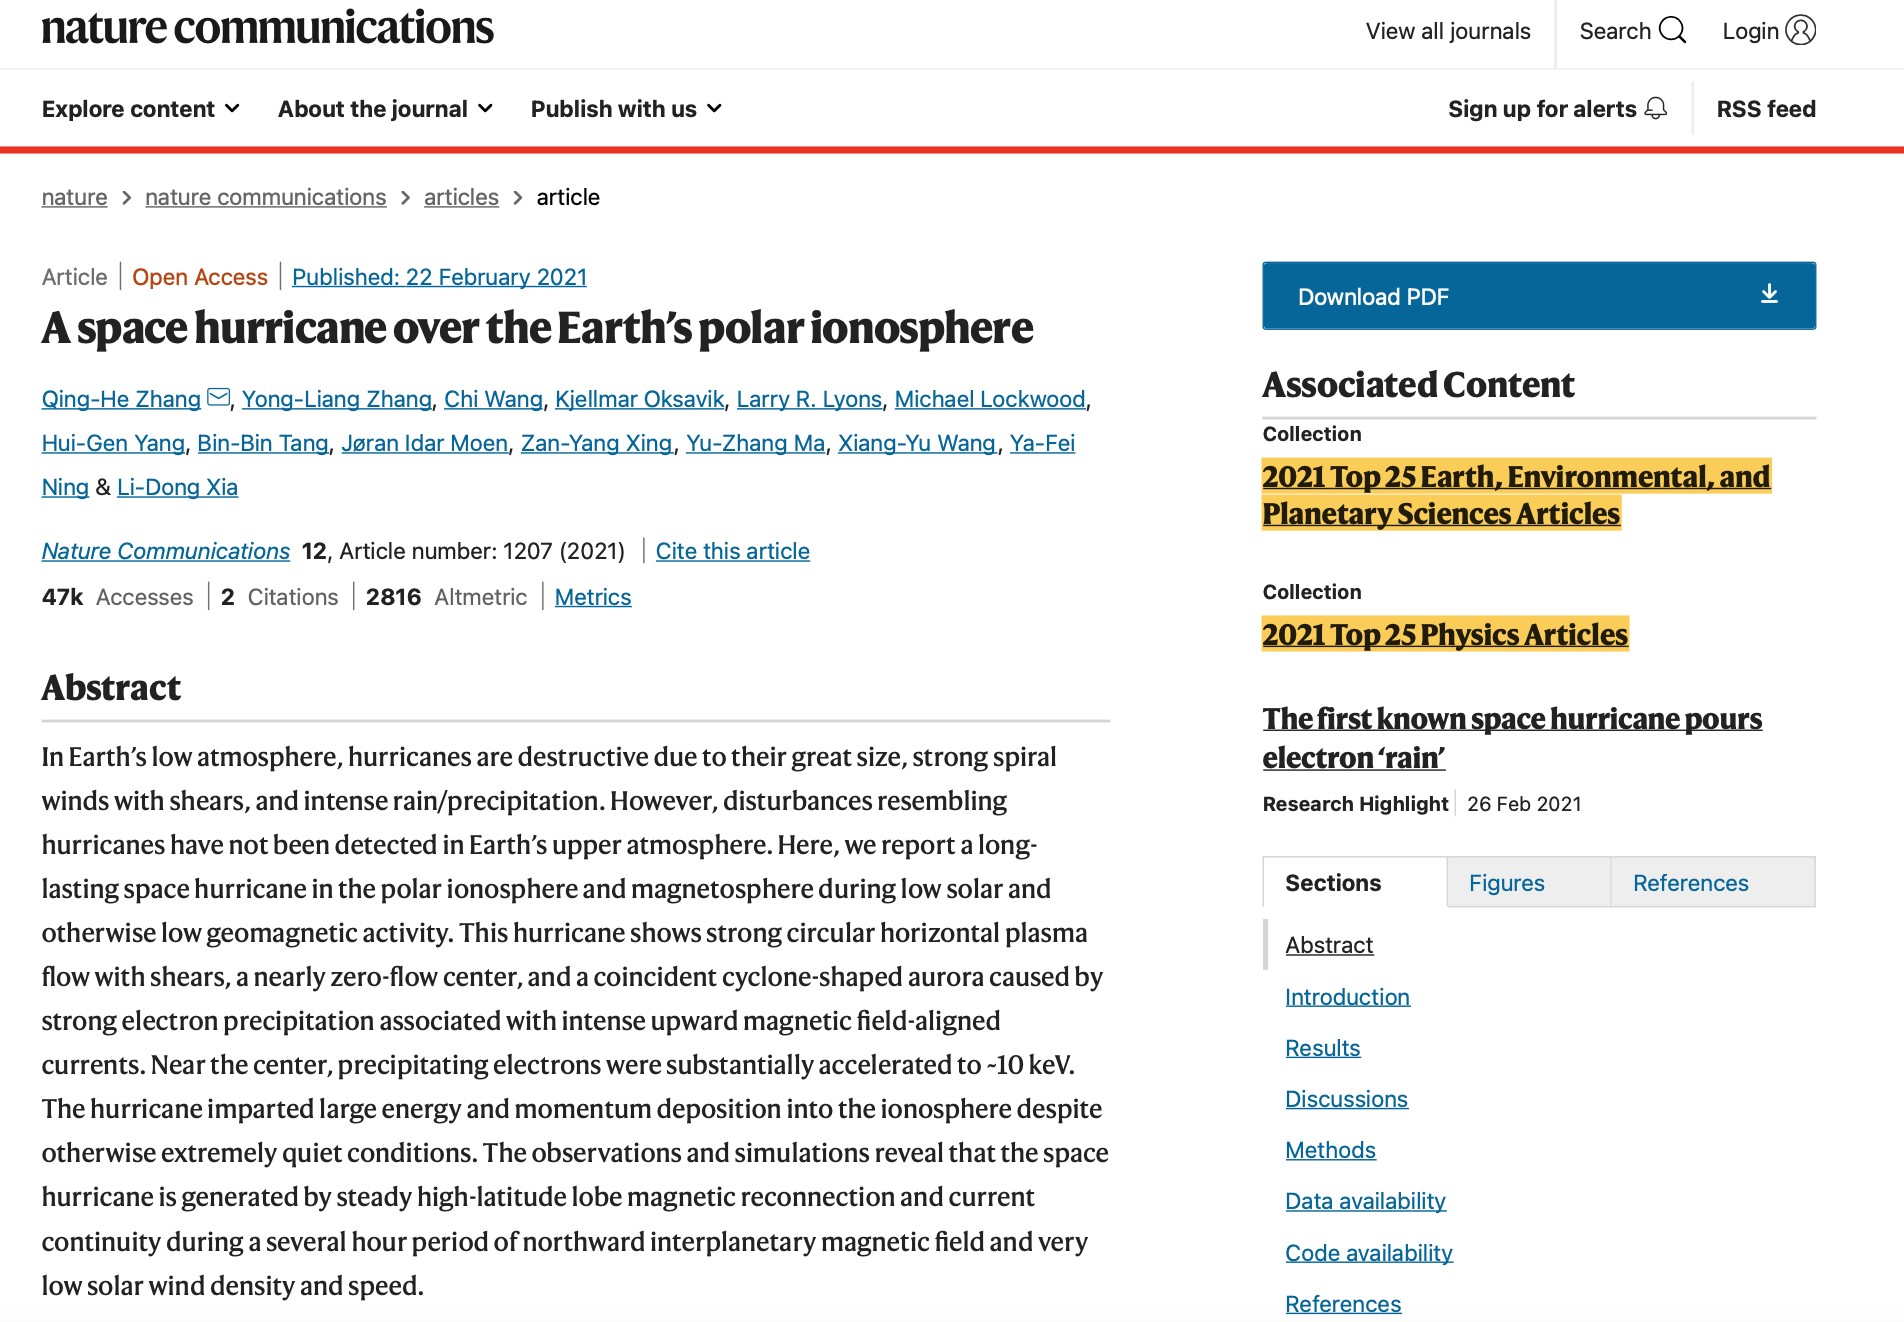 Article from Prof. Zhang Qinghe’s Research Group Was Selected Both as 2021 Top 25 Physics Articles and Earth, Environmental, and Planetary Sciences Articles Published in Nature Communications